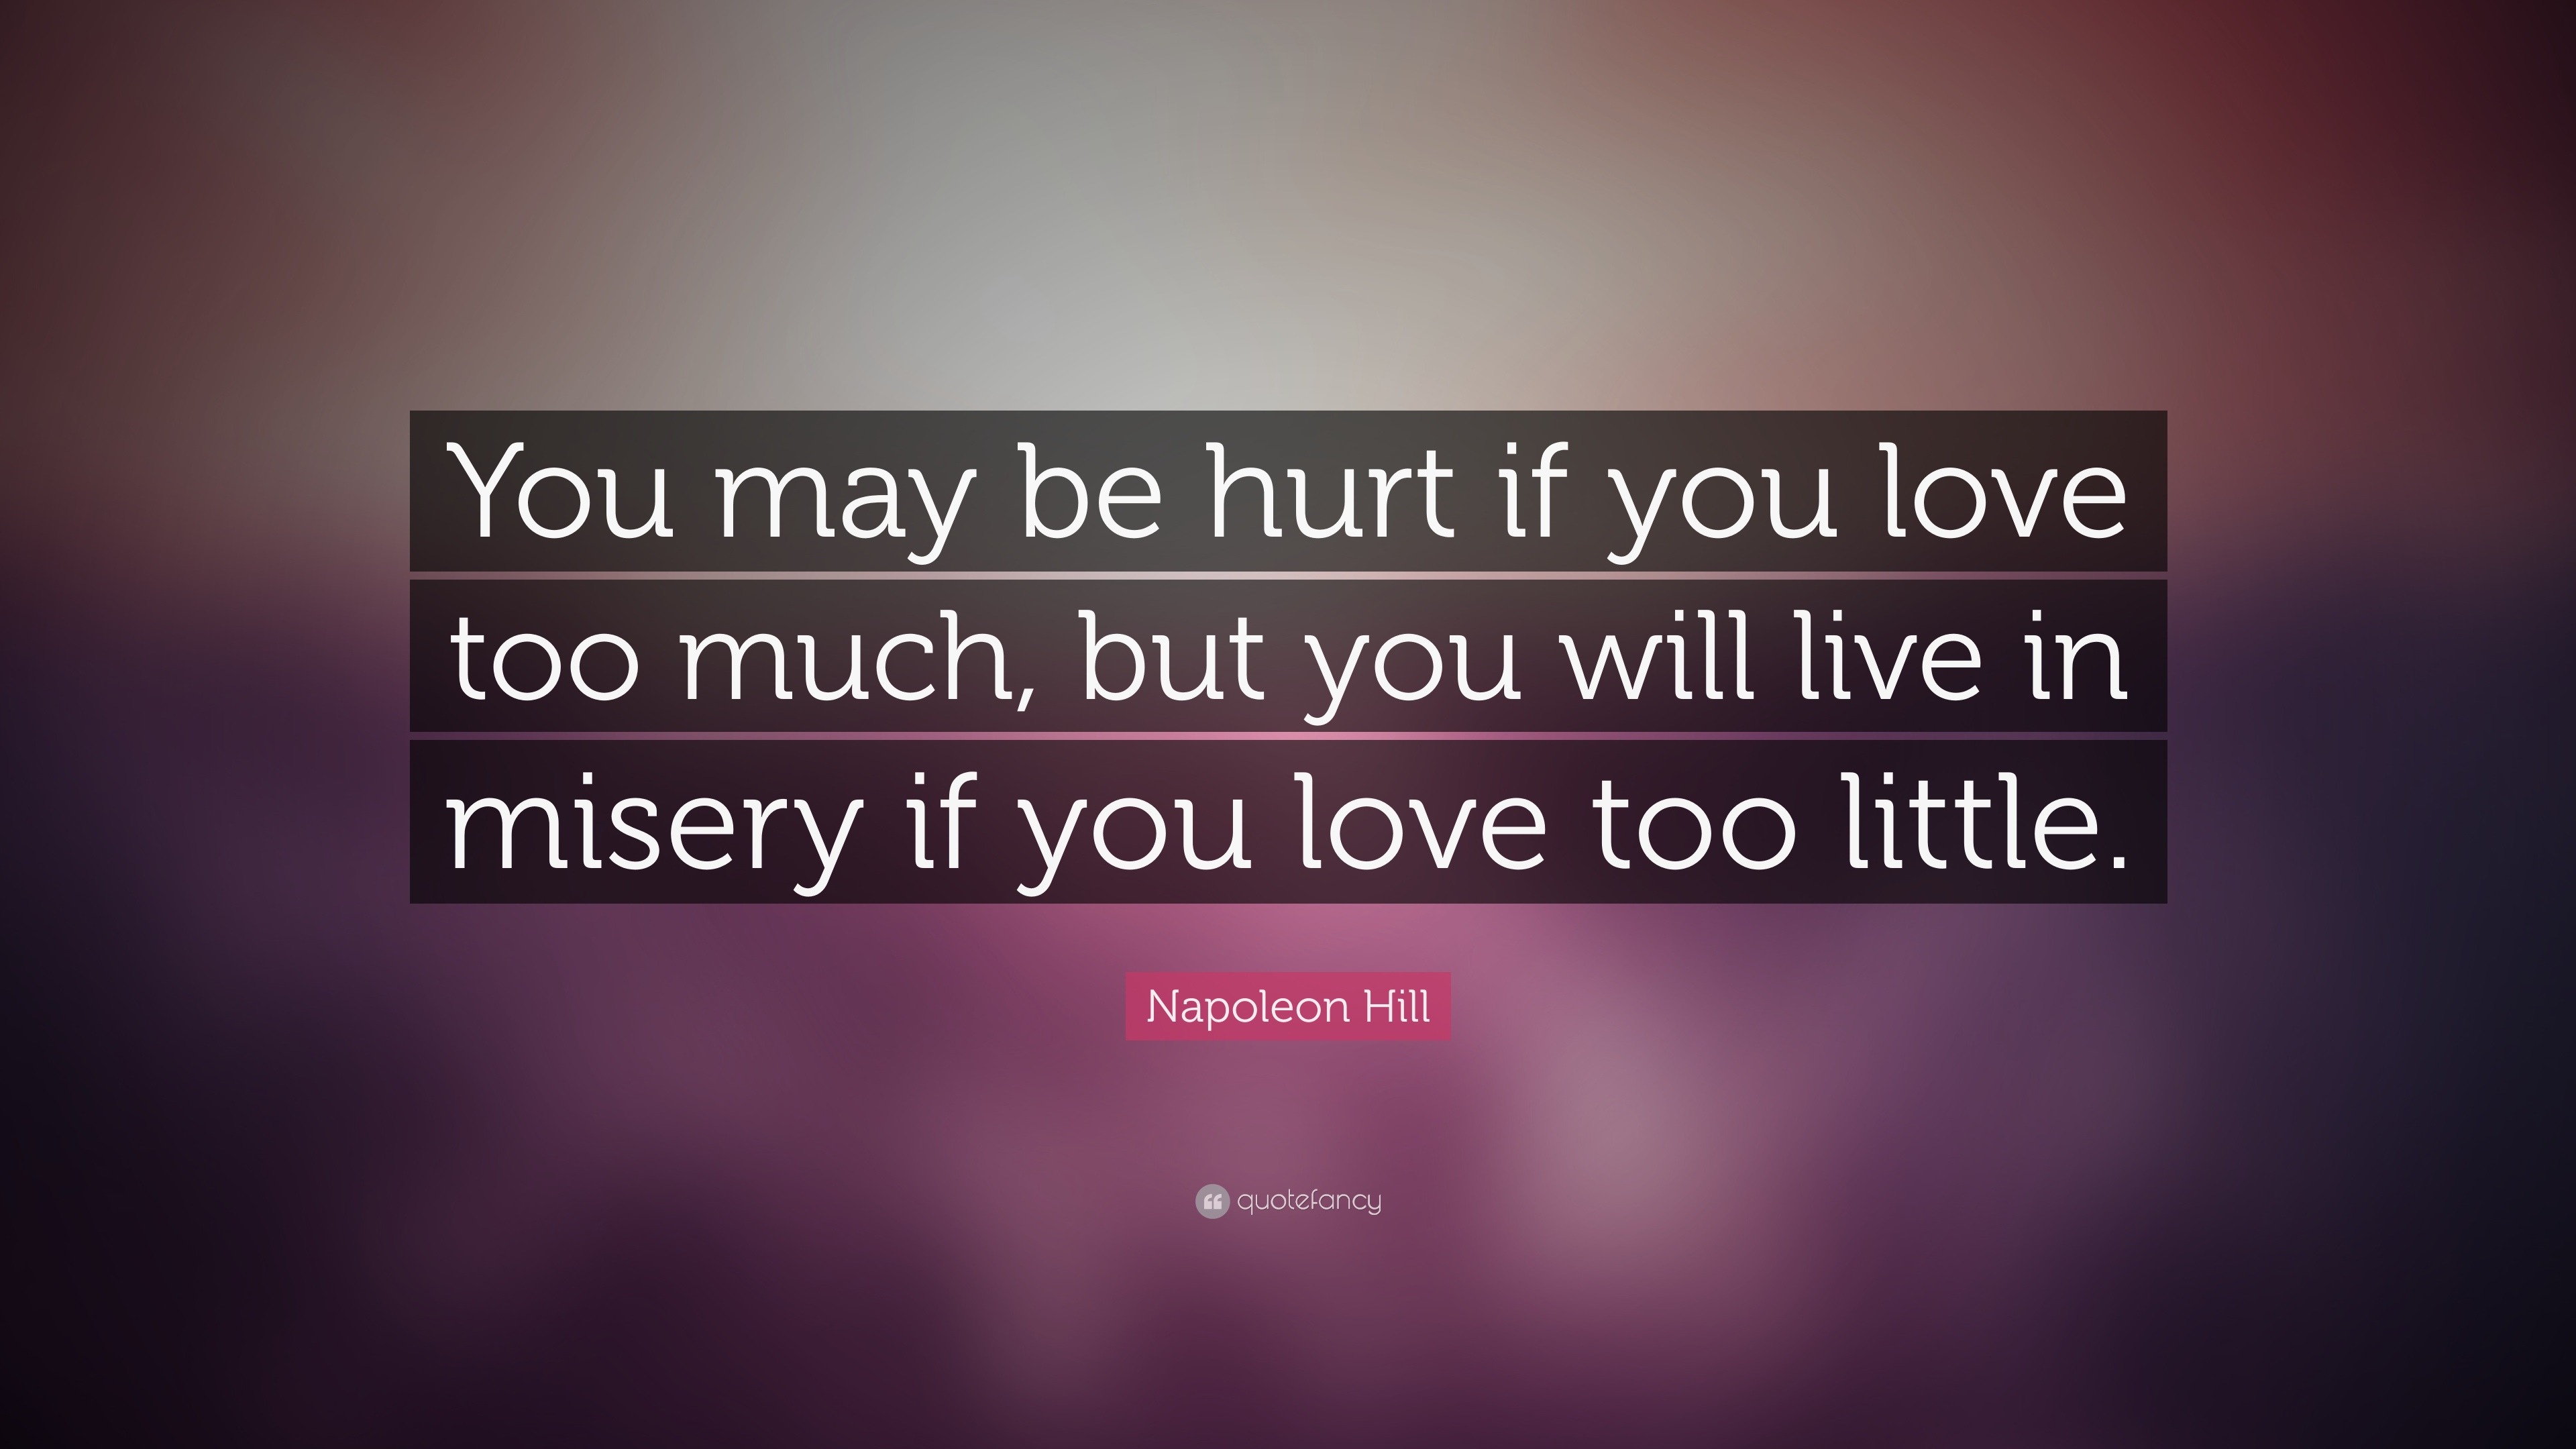 Napoleon Hill Quote: “You may be hurt if you love too much, but you